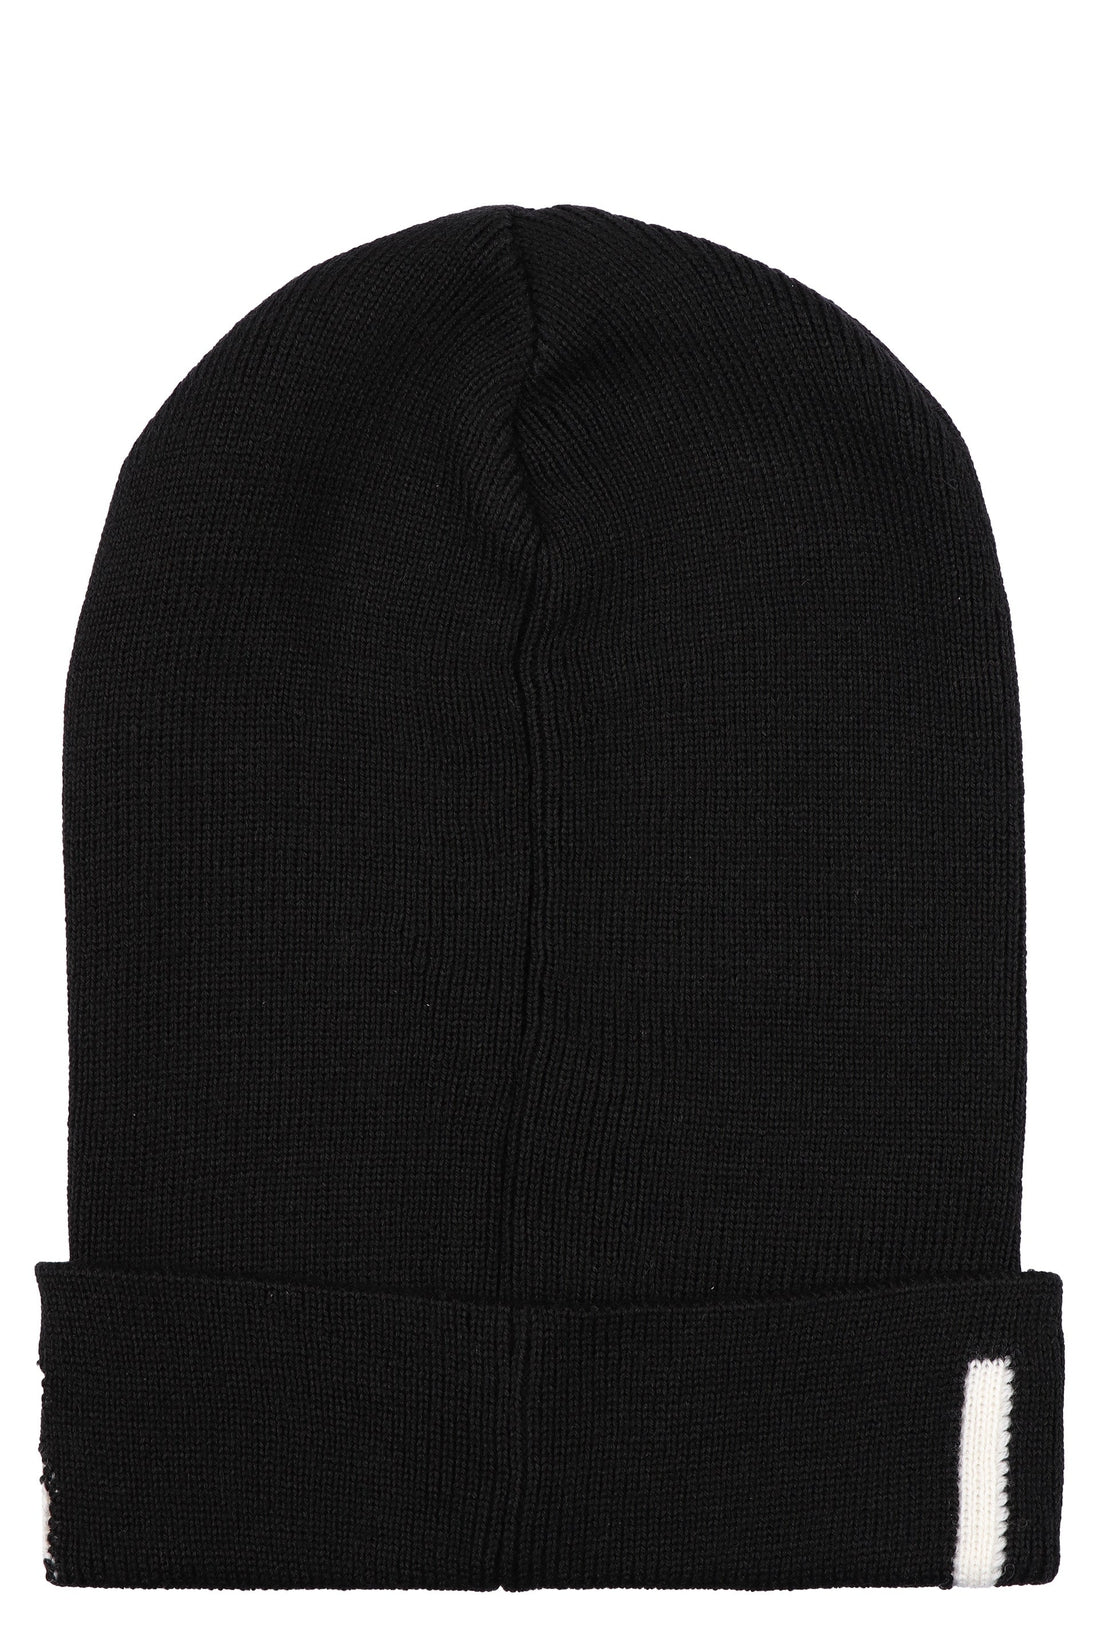 RED VALENTINO-OUTLET-SALE-Knitted virgin wool hat-ARCHIVIST